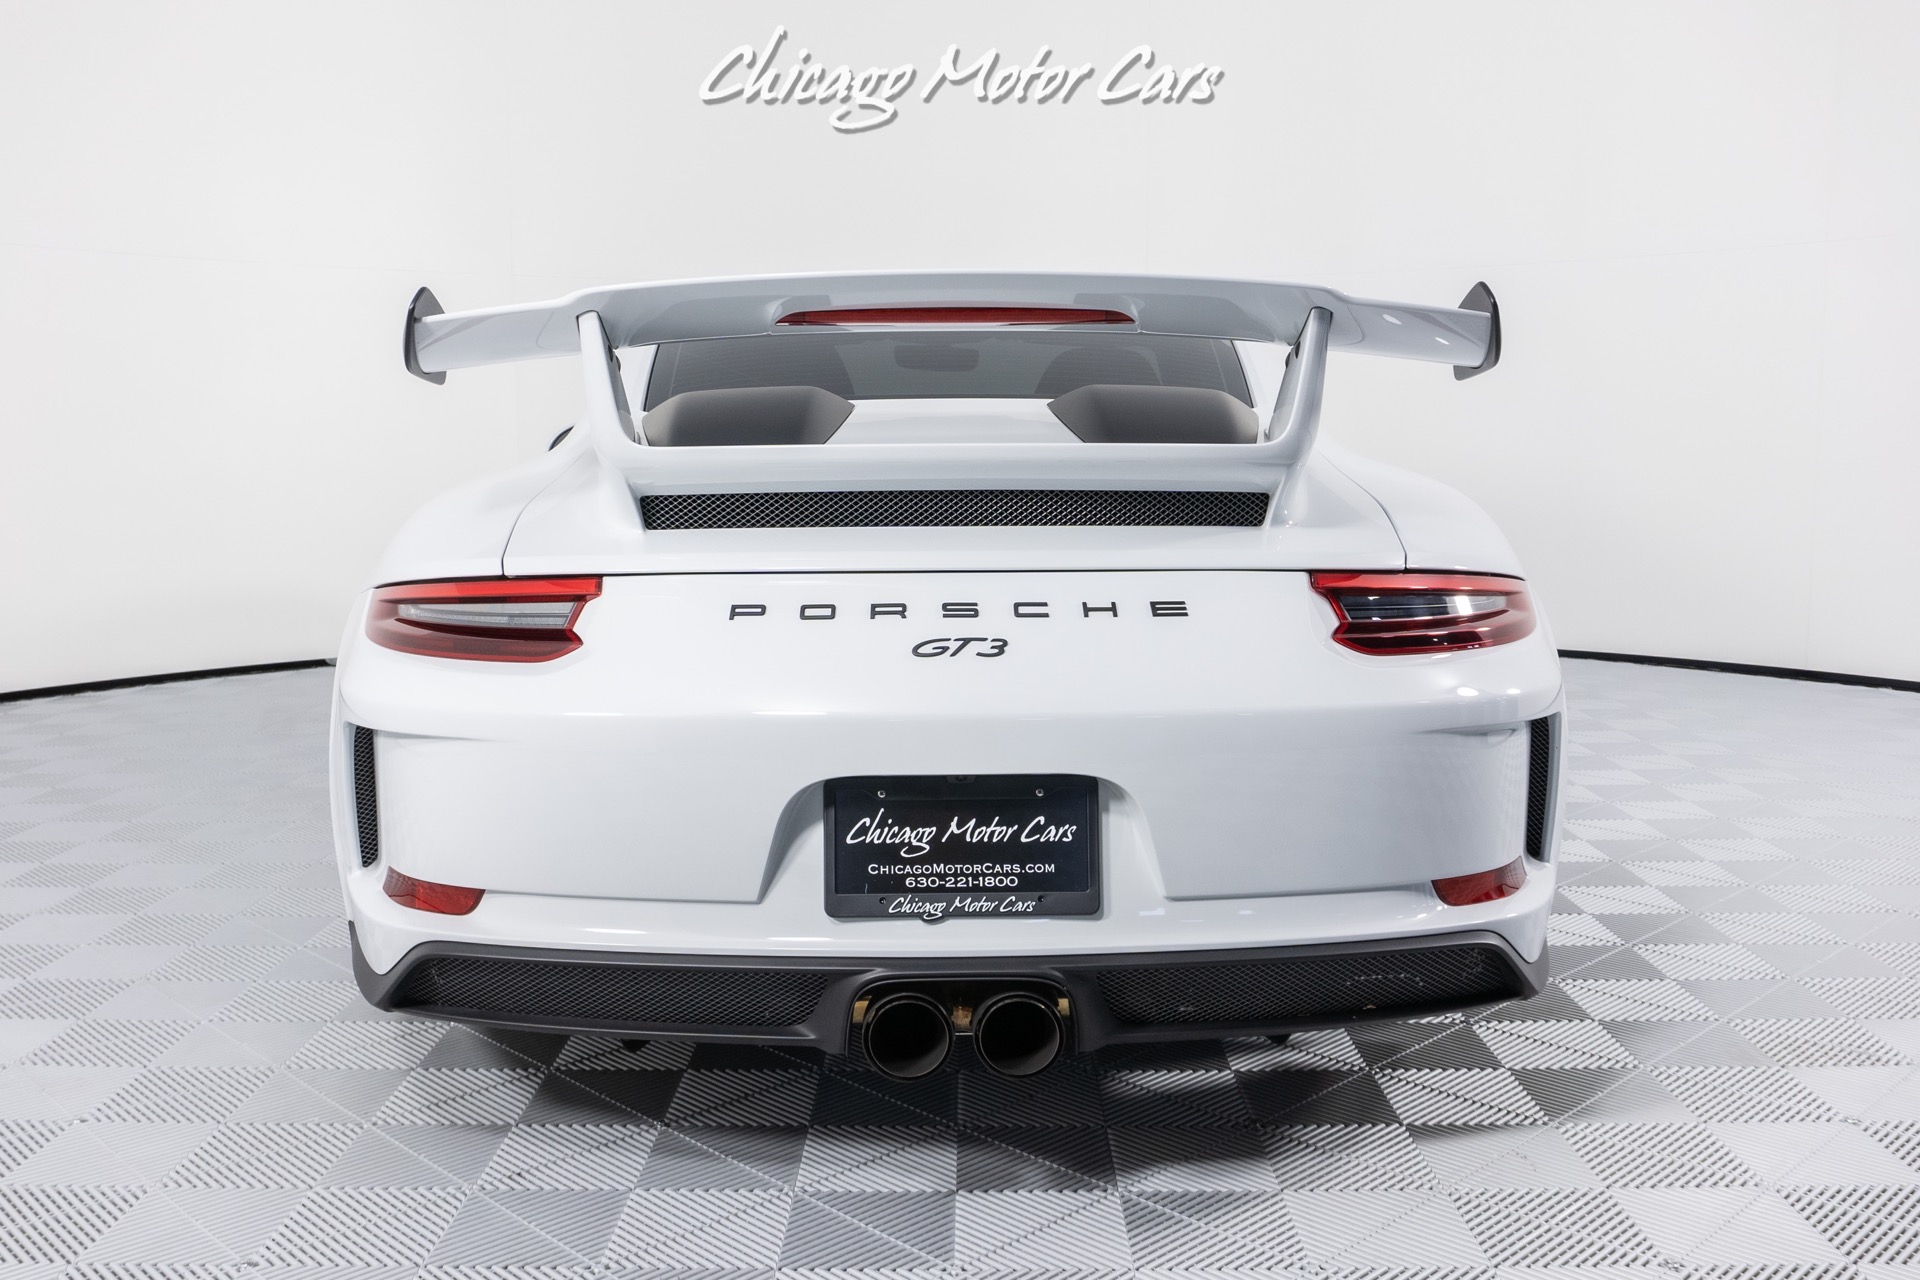 Used-2018-Porsche-911-GT3-Coupe-K40-Carbon-Fiber-PPF-Lift-Full-Fabspeed-EXHAUST